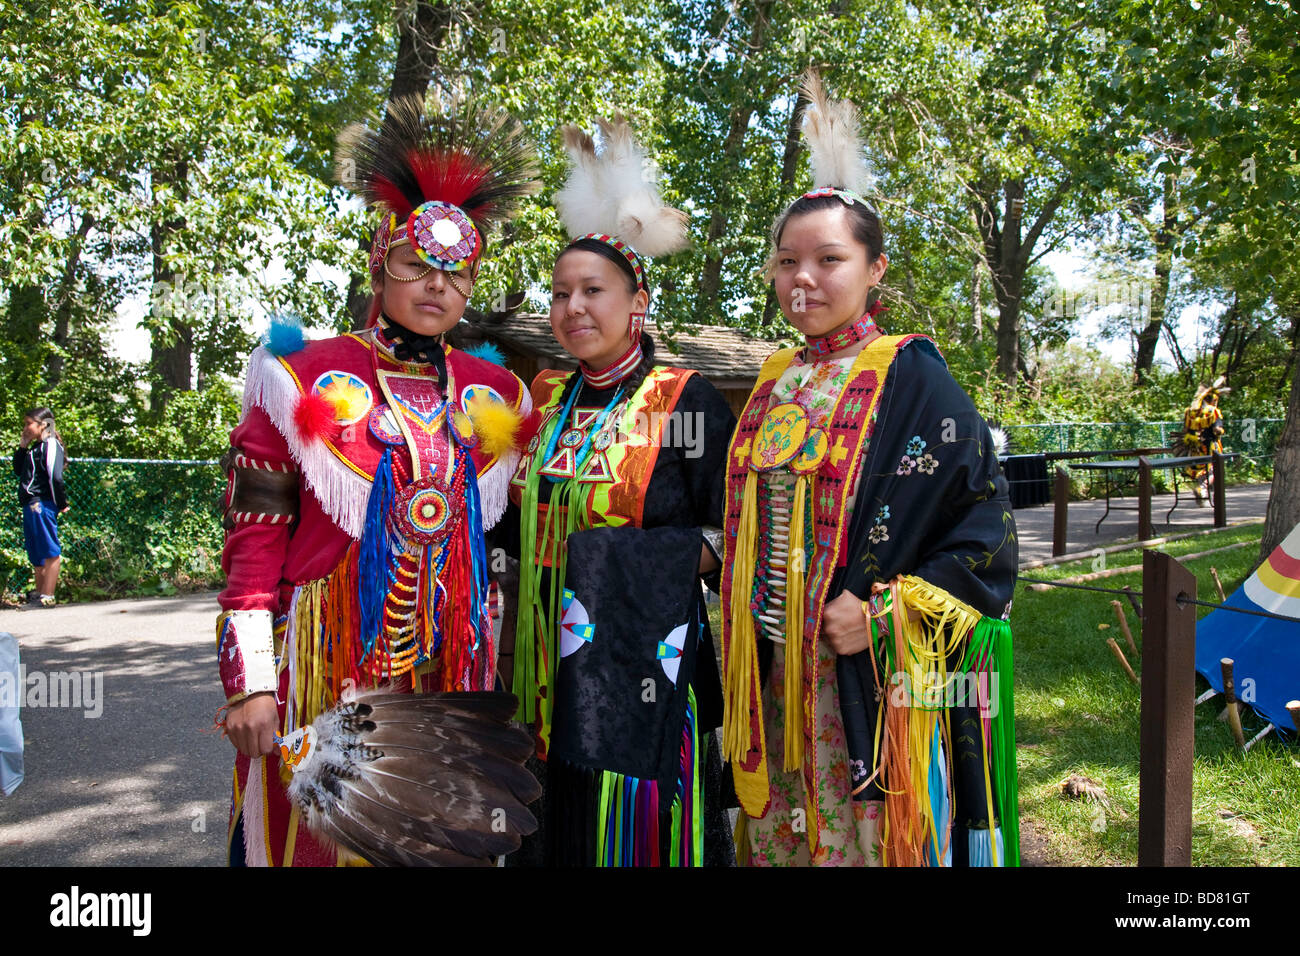 North American Plaims Native Indian in traditional dress at Pow Wow in ...